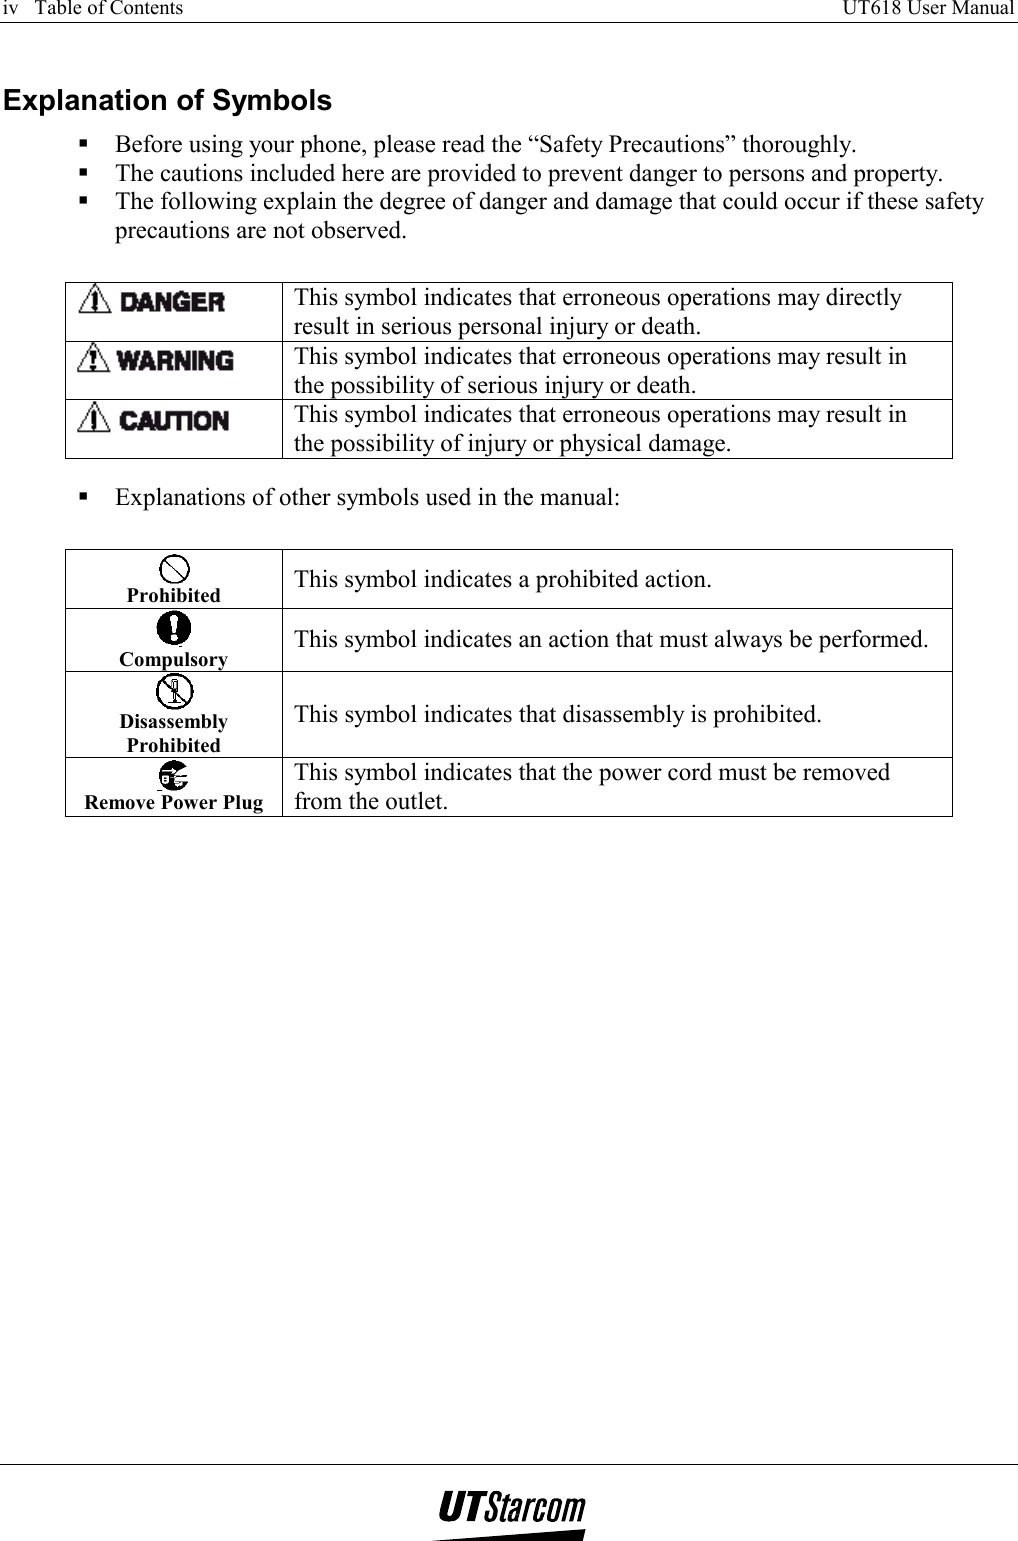 iv   Table of Contents     UT618 User Manual      Explanation of Symbols  Before using your phone, please read the “Safety Precautions” thoroughly.  The cautions included here are provided to prevent danger to persons and property.  The following explain the degree of danger and damage that could occur if these safety precautions are not observed.   This symbol indicates that erroneous operations may directly result in serious personal injury or death.  This symbol indicates that erroneous operations may result in the possibility of serious injury or death.  This symbol indicates that erroneous operations may result in the possibility of injury or physical damage.   Explanations of other symbols used in the manual:  Prohibited   This symbol indicates a prohibited action.  Compulsory  This symbol indicates an action that must always be performed.  Disassembly Prohibited This symbol indicates that disassembly is prohibited.  Remove Power Plug This symbol indicates that the power cord must be removed from the outlet.  